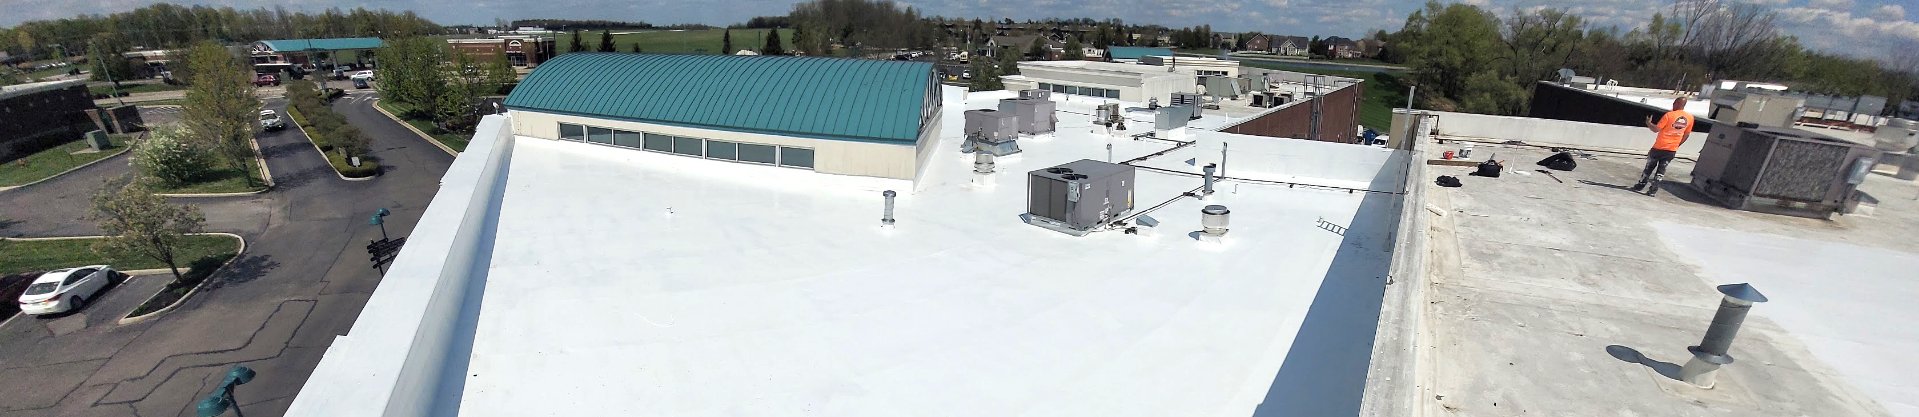 Commercial Roof coated with Duro-Last Materials | Technical Roofing | Duro-Last